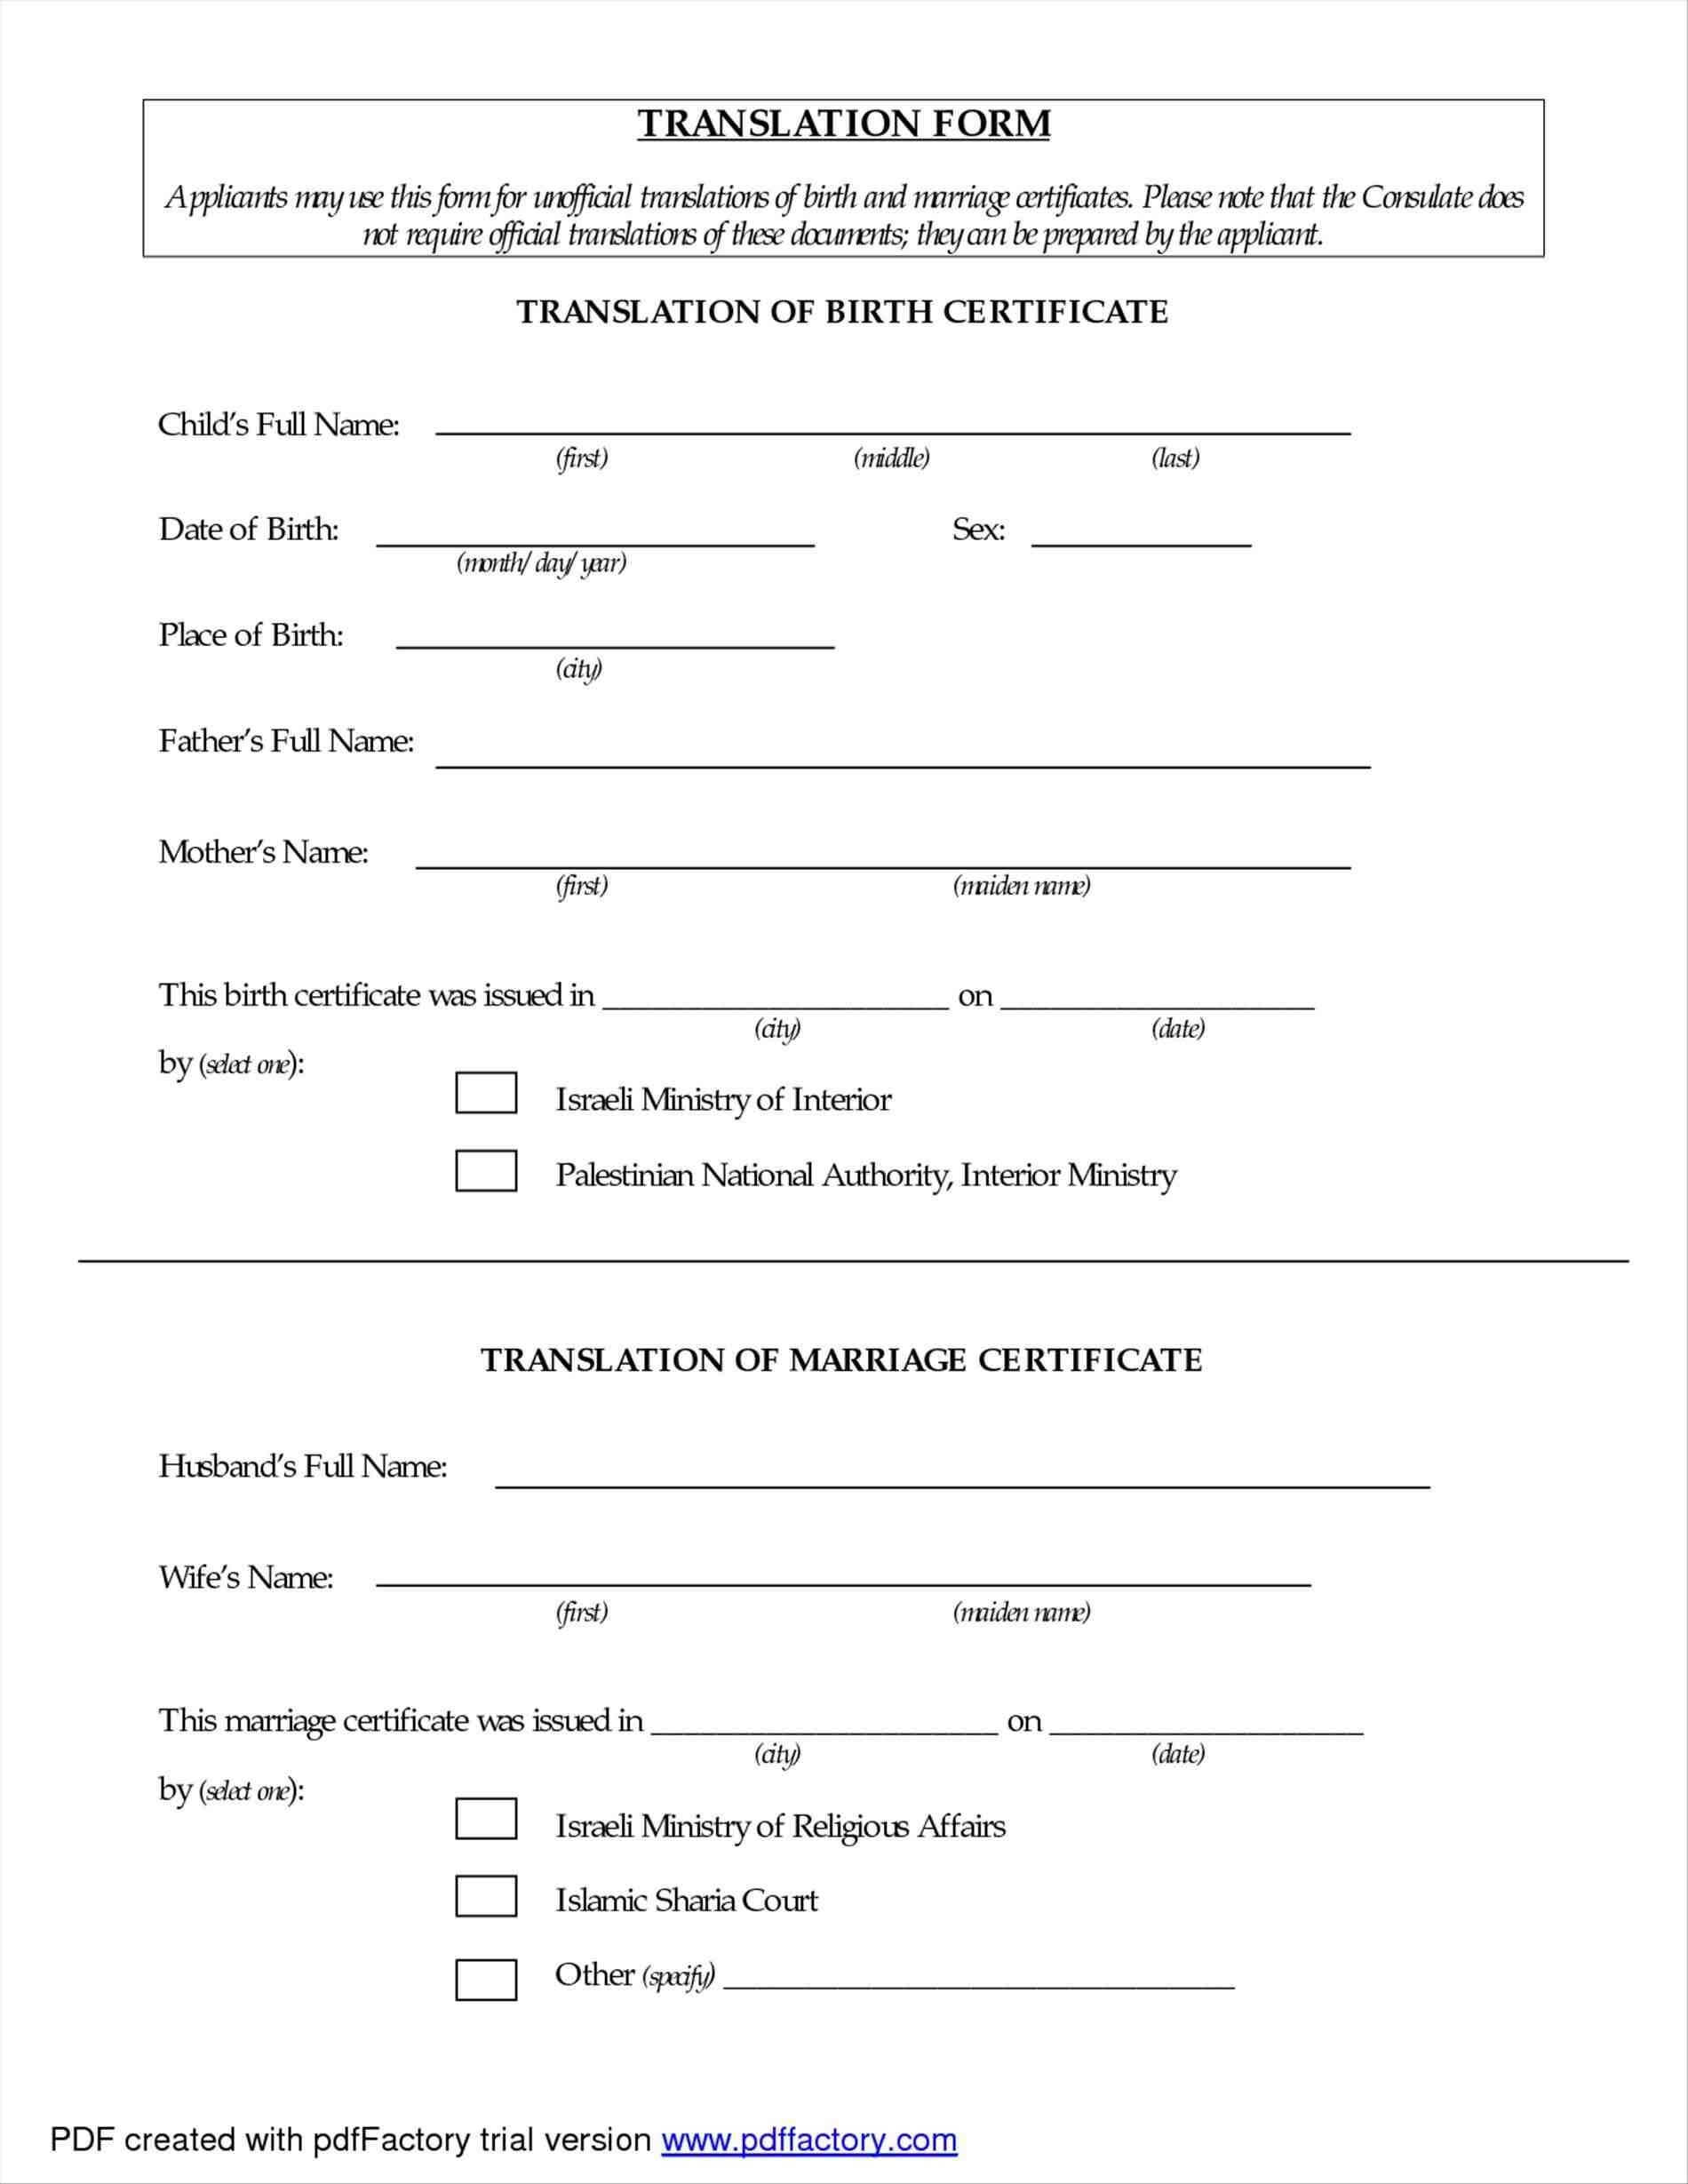 021 Large Certificate Of Marriage Template Beautiful Ideas In Marriage Certificate Translation Template